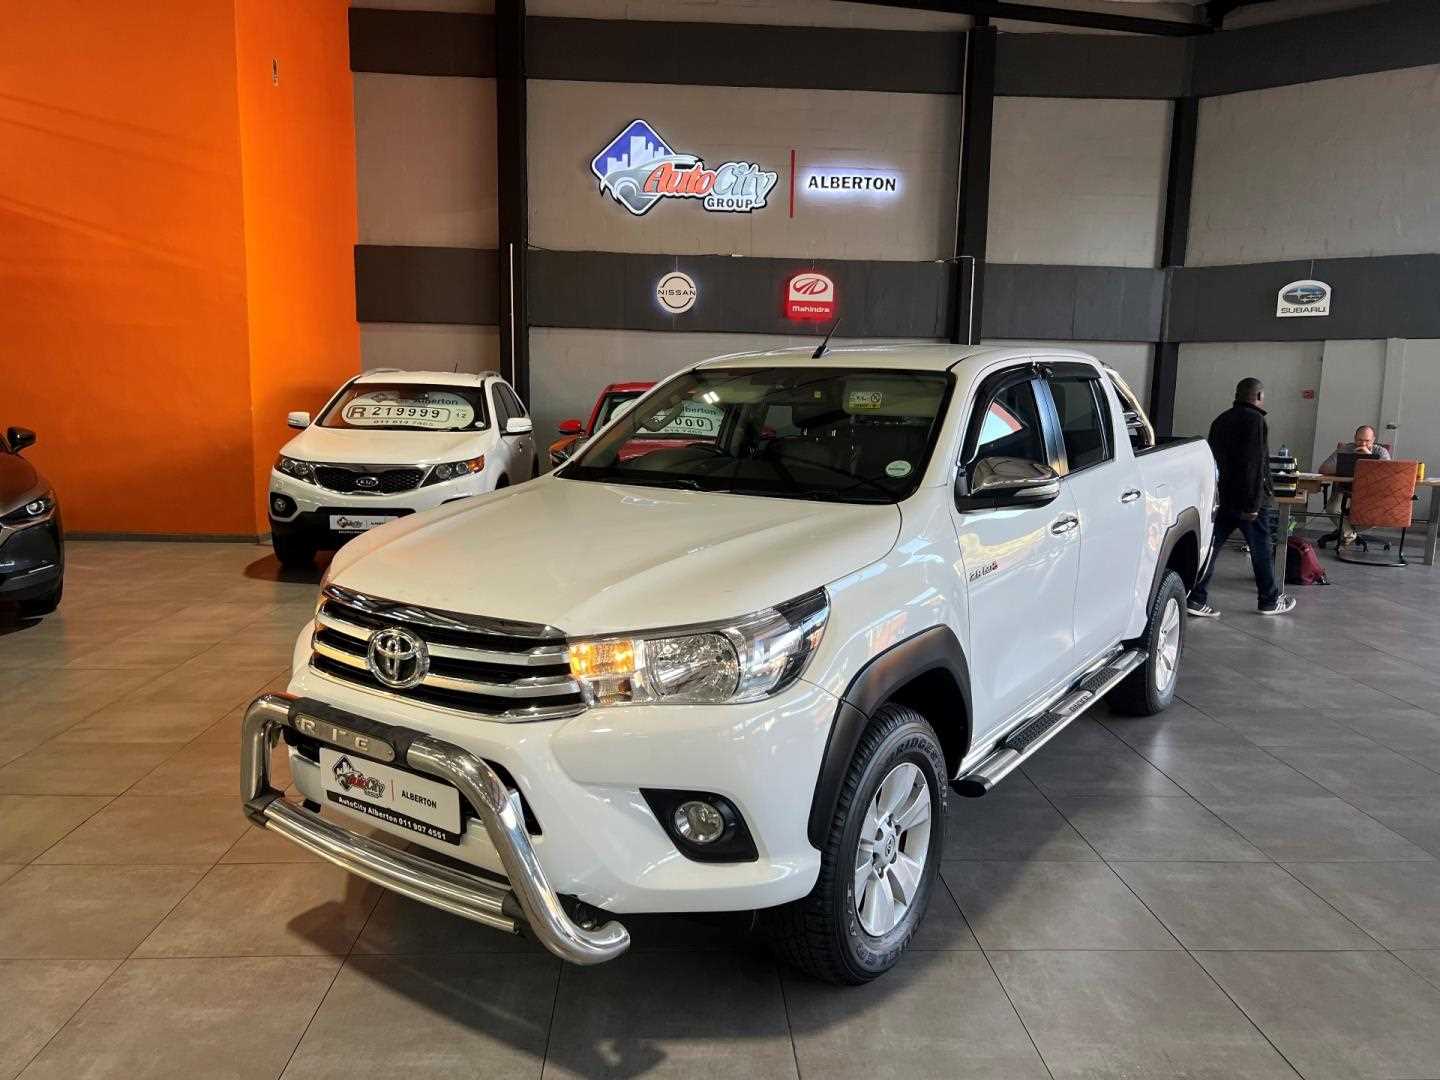 Toyota HILUX 2.8 GD-6 RAIDER 4X4 A/T P/U D/C for Sale in South Africa